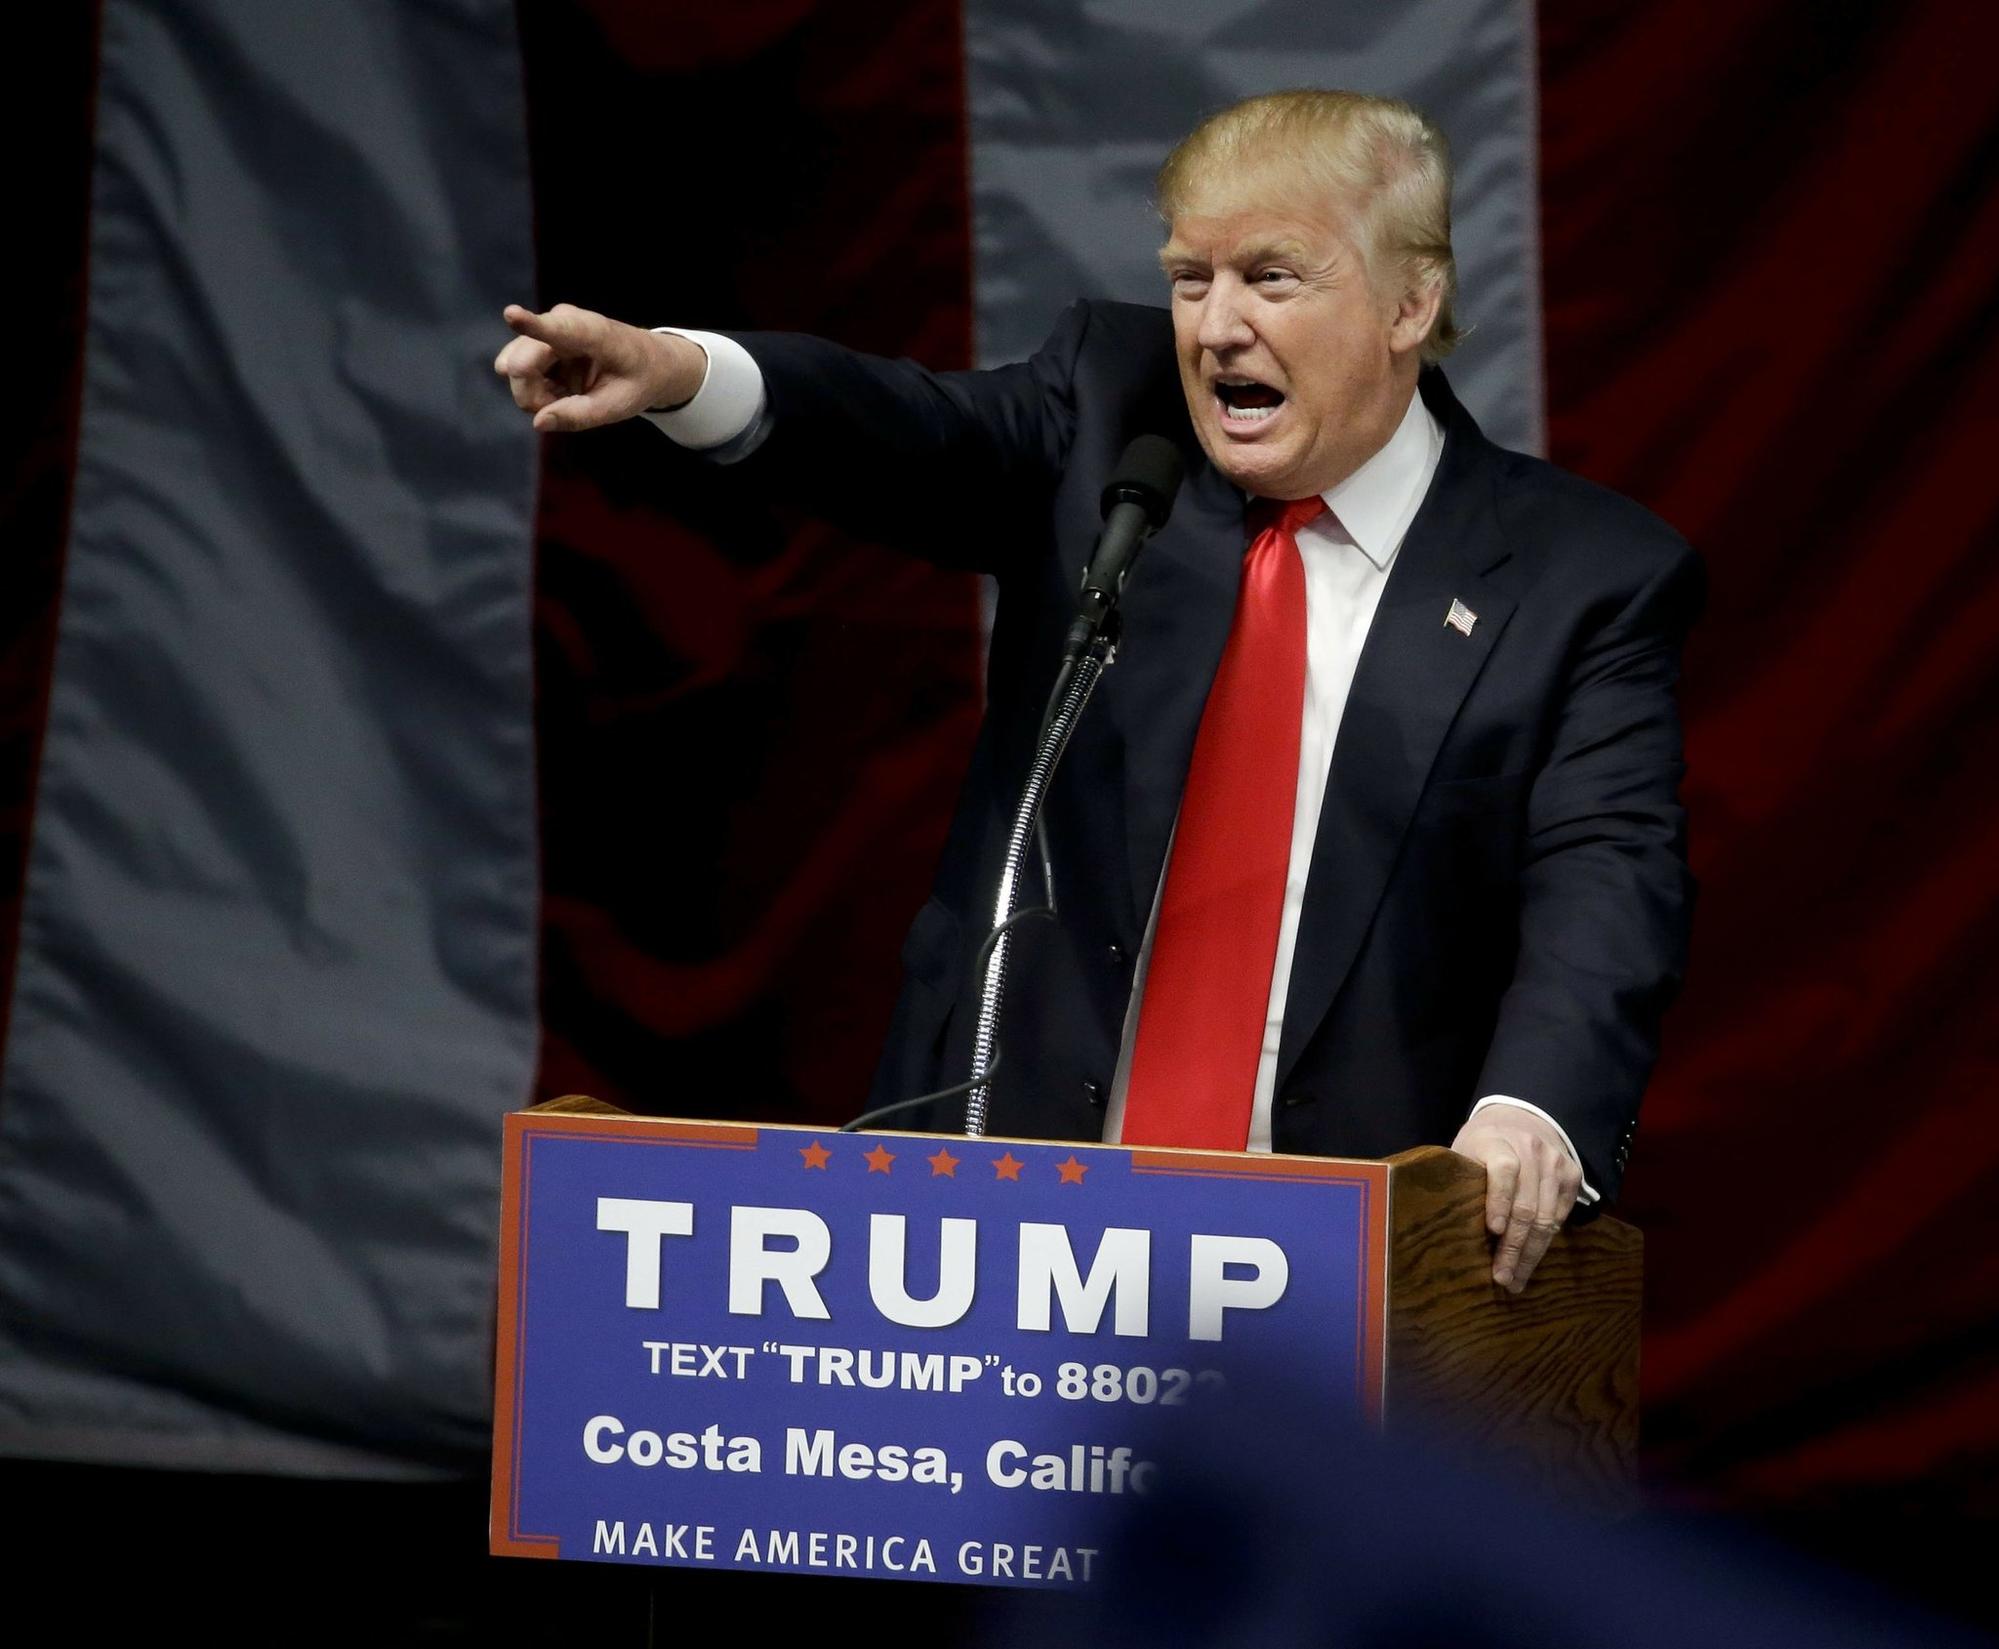 FILE - In this April 28, 2016 file photo, Republican presidential candidate Donald Trump speaks during a rally in Costa Mesa, Calif. Police are preparing for the possibility of p